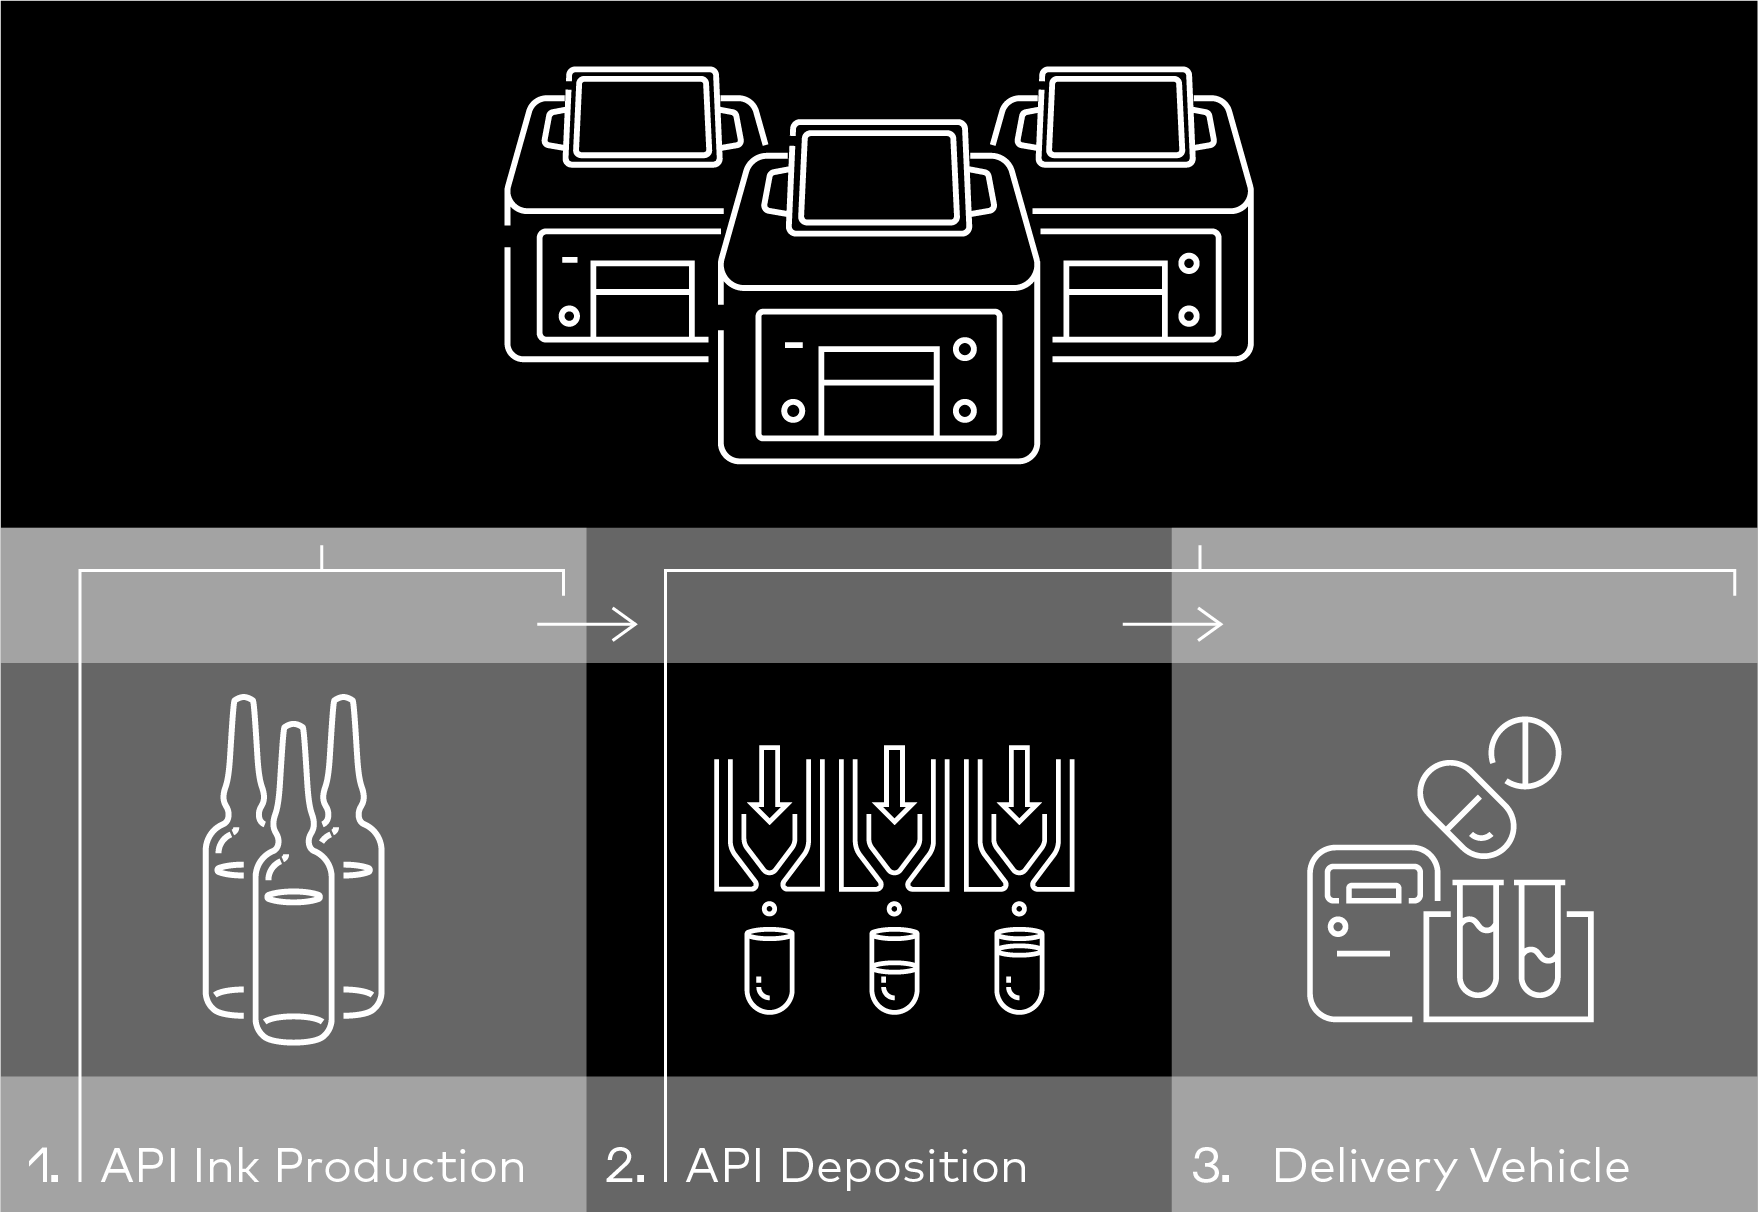 API (active pharmaceutical ingredient) ink production at a centralized manufacturing facility, API deposition onsite by drop-on-demand dispensing using the I.DOT Non-Contact Dispenser, and delivery vehicle and mechanism consideration (e.g., single-dose vials, capsules, or orodispersible film, etc.) steps of the point-of-care (POC) manufacturing processes.